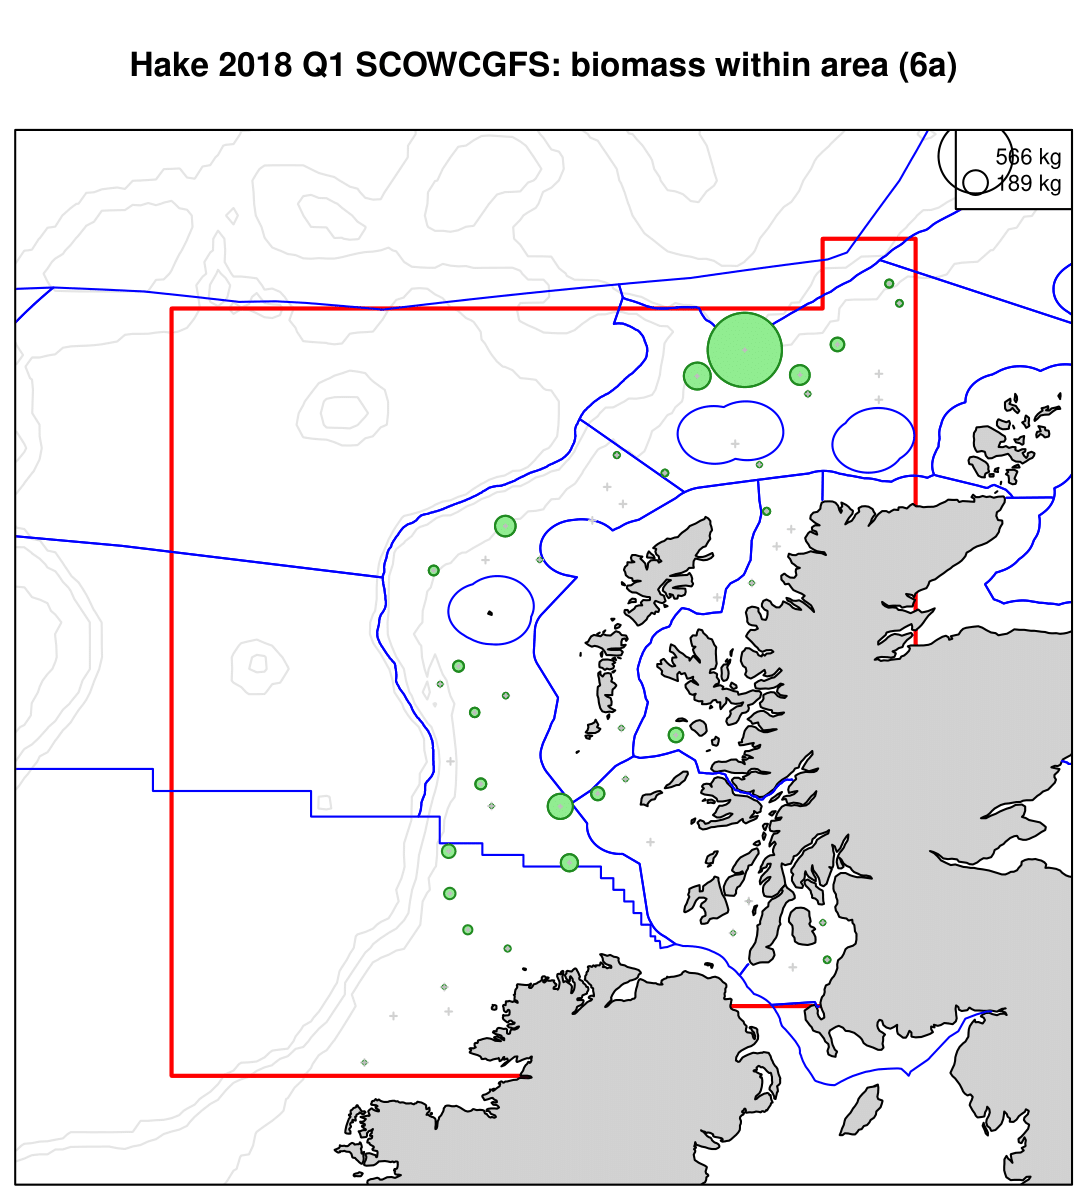 Hake 2018 Q1 SCOWCGFS: biomass within area (6a)